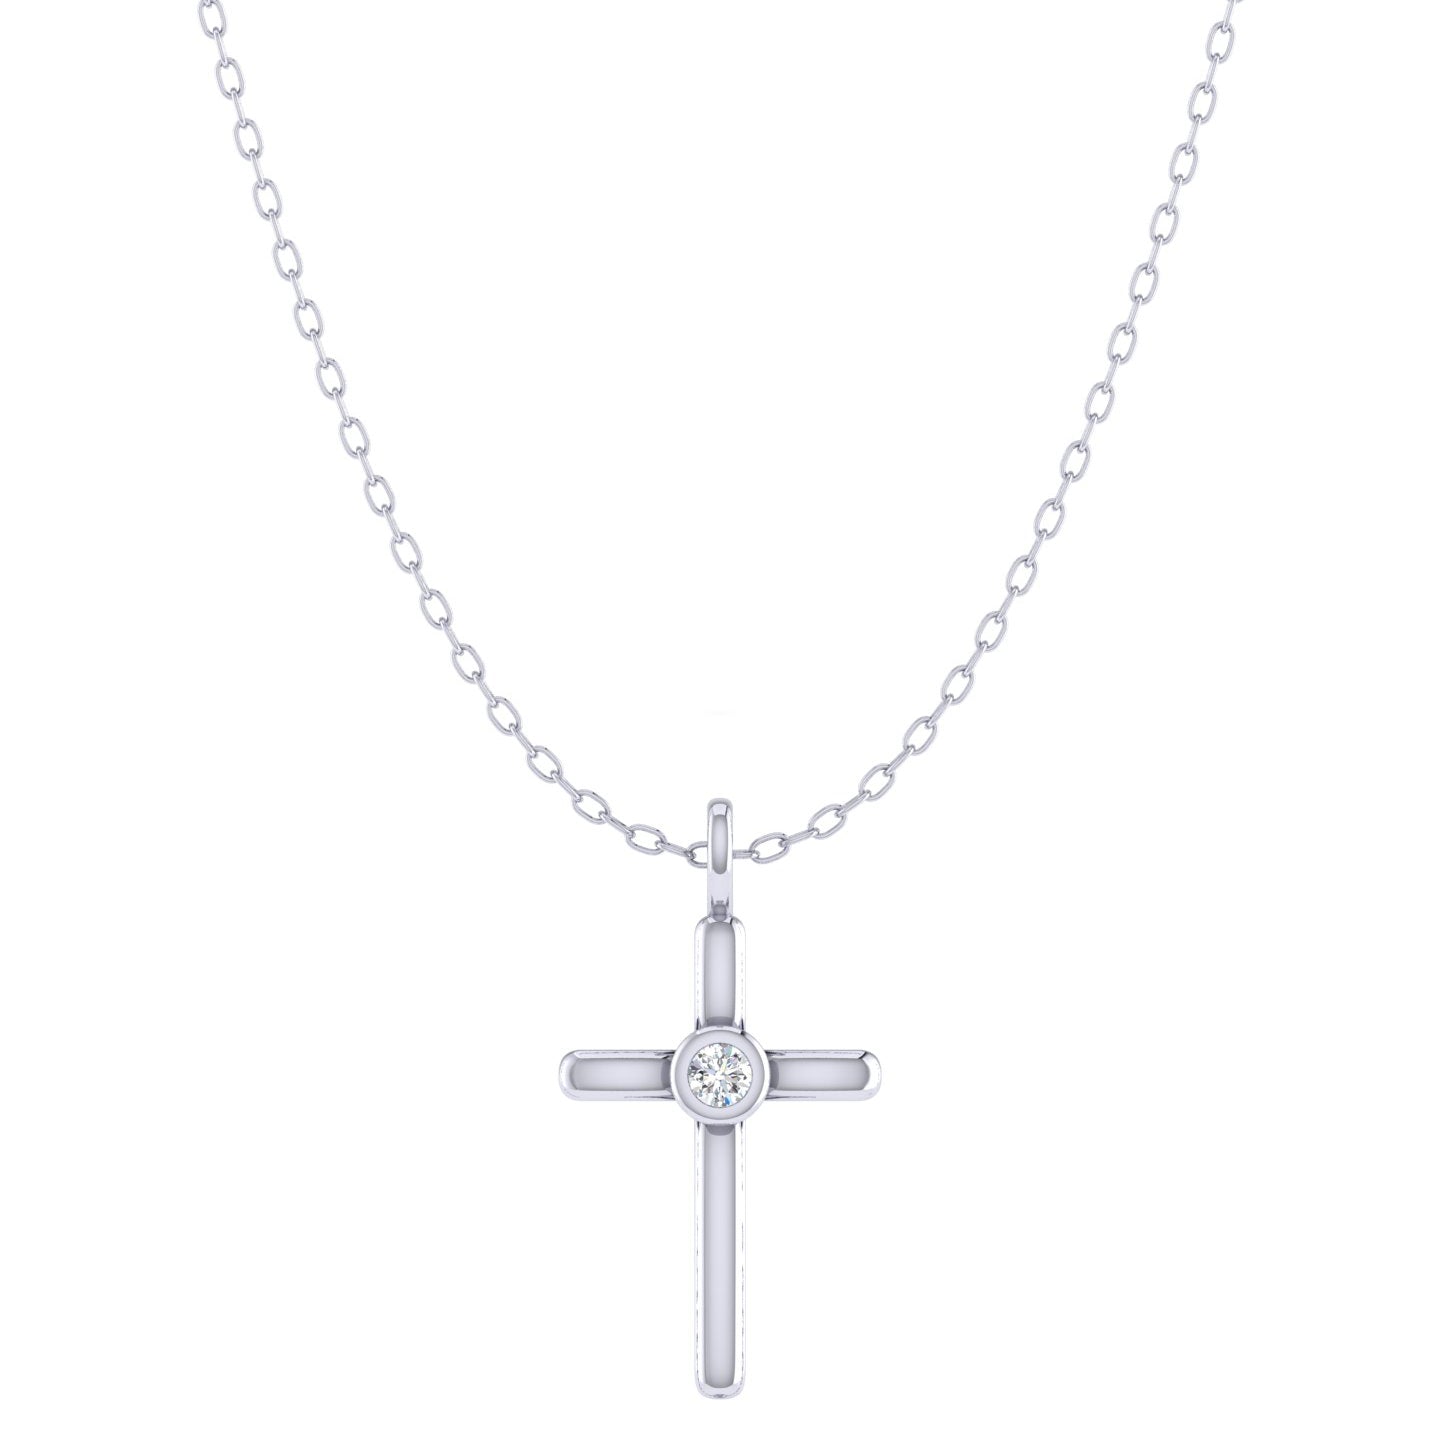 Simple Cross 1/20 Cttw Natural Diamond Pendant Necklace set in 925 Sterling Silver